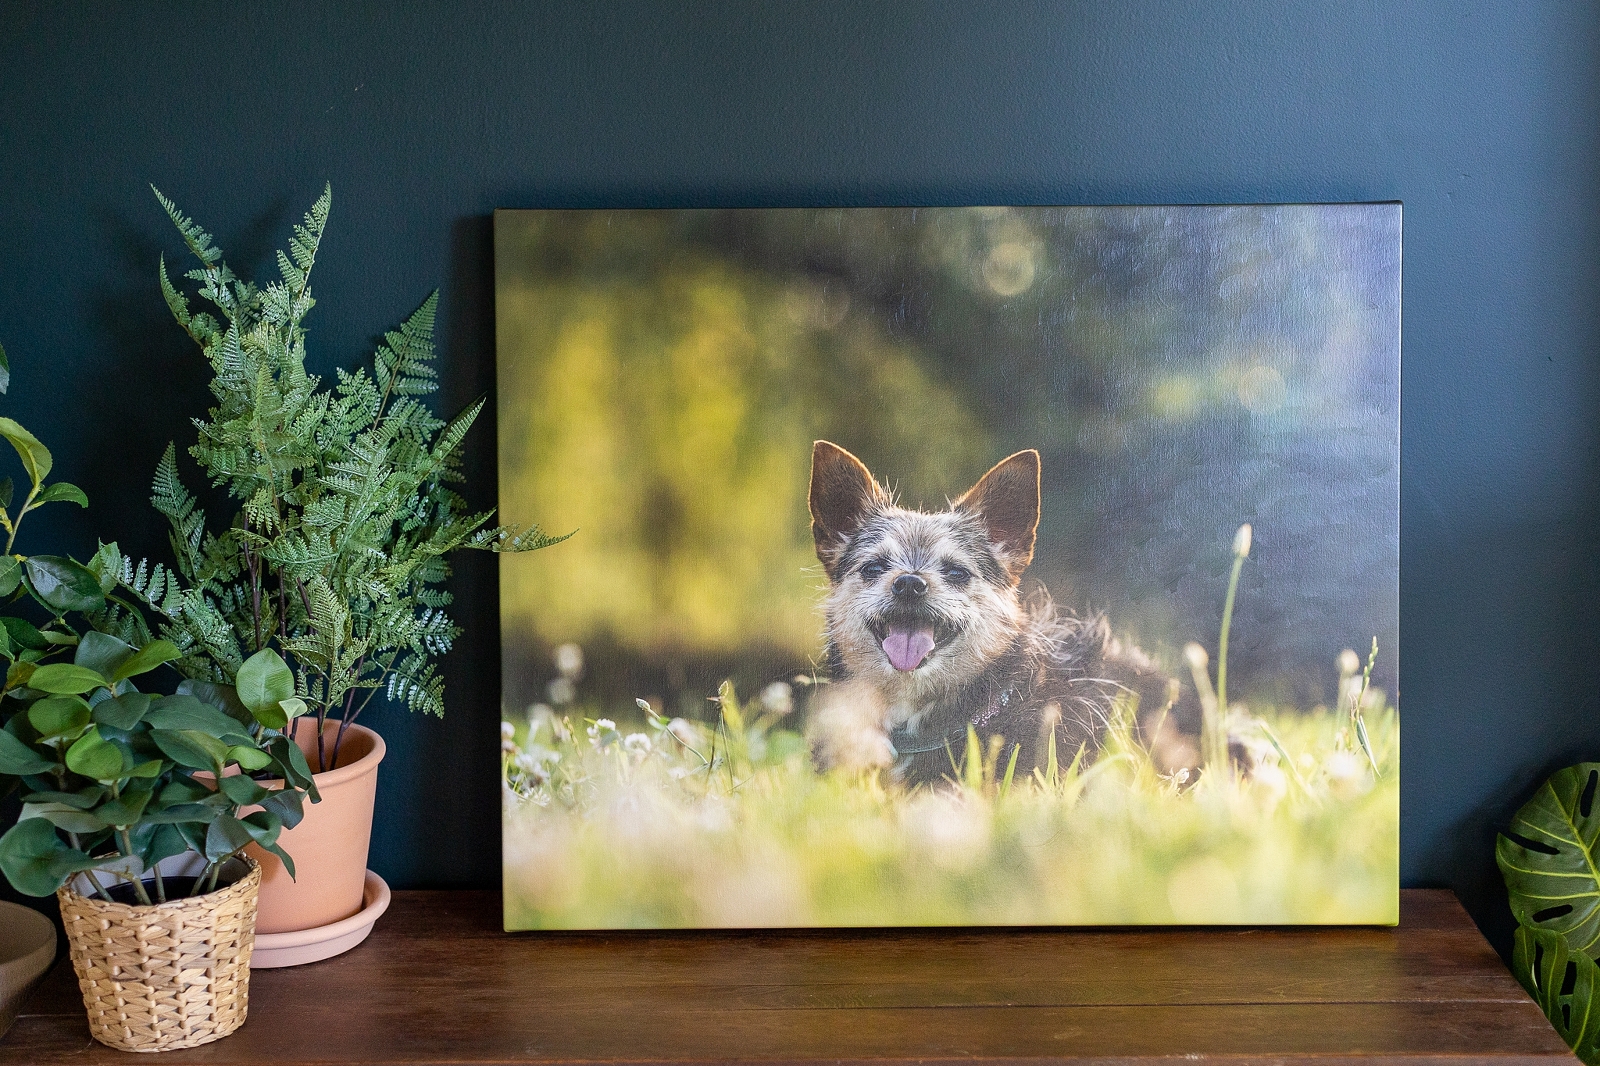 A canvas print of a dog displayed on a shelf, flanked by potted indoor plants.